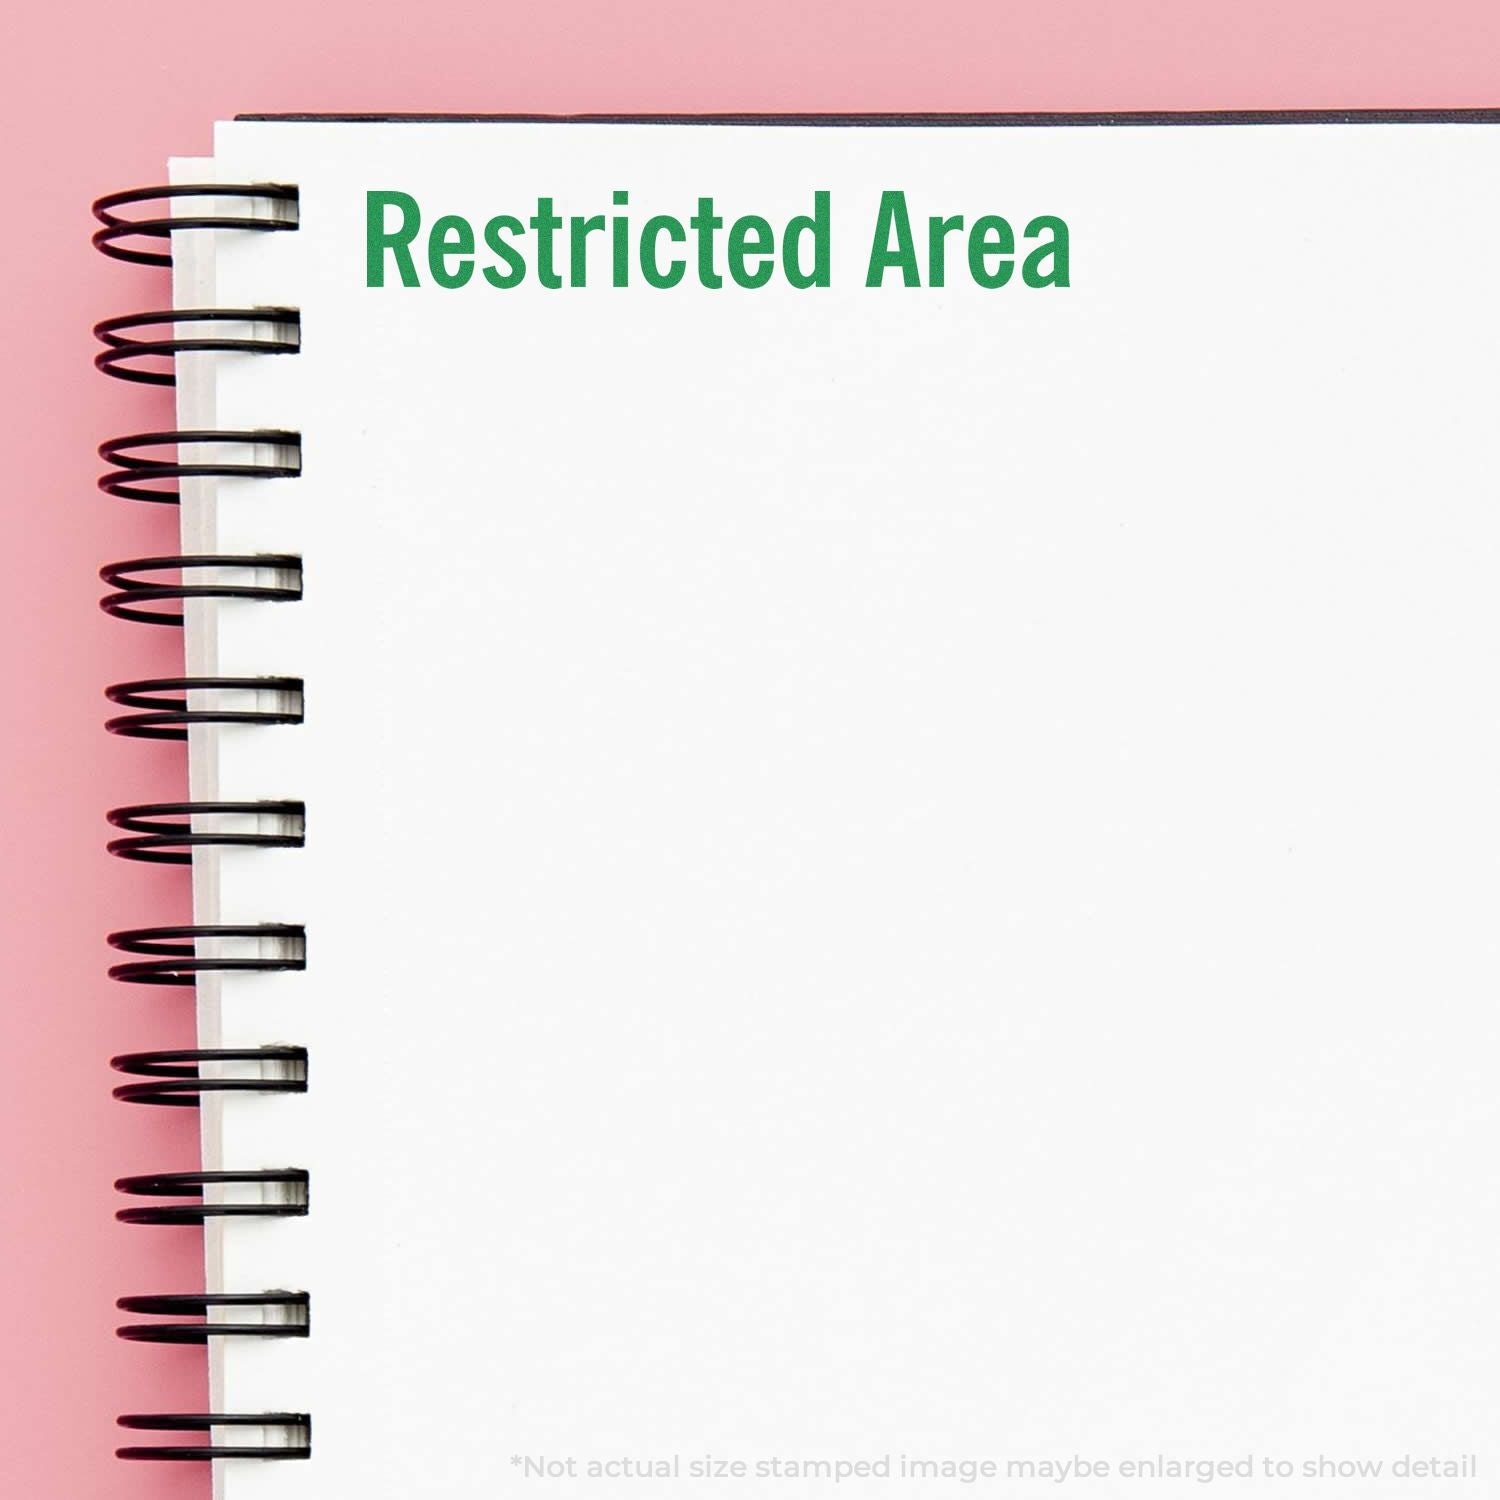 A self-inking stamp with a stamped image showing how the text "Restricted Area" is displayed after stamping.